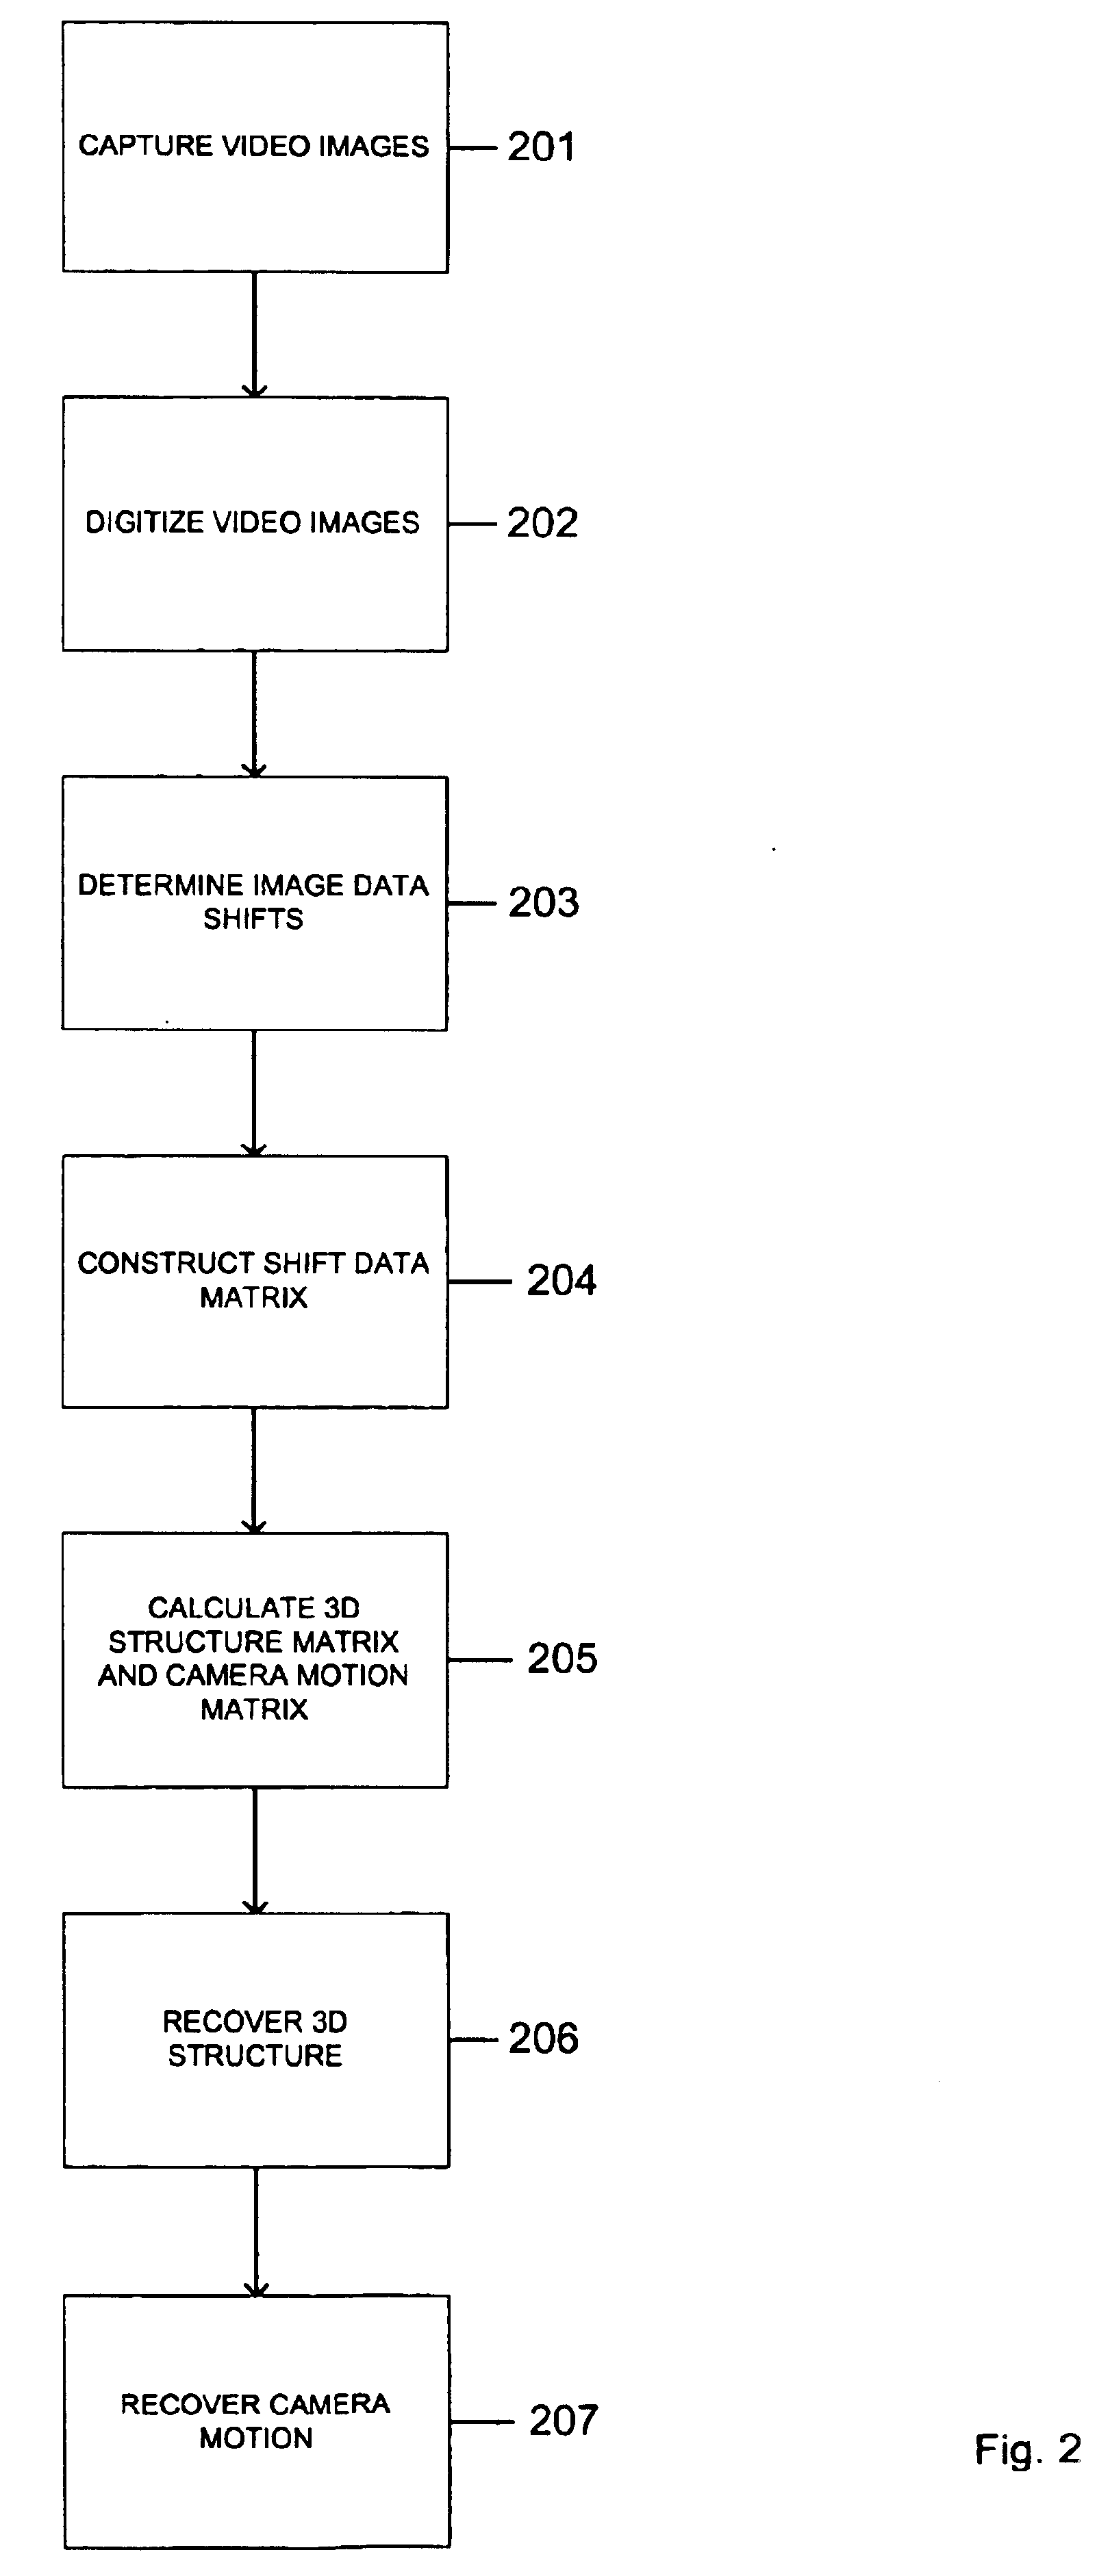 Method for recovering 3D scene structure and camera motion from points, lines and/or directly from the image intensities